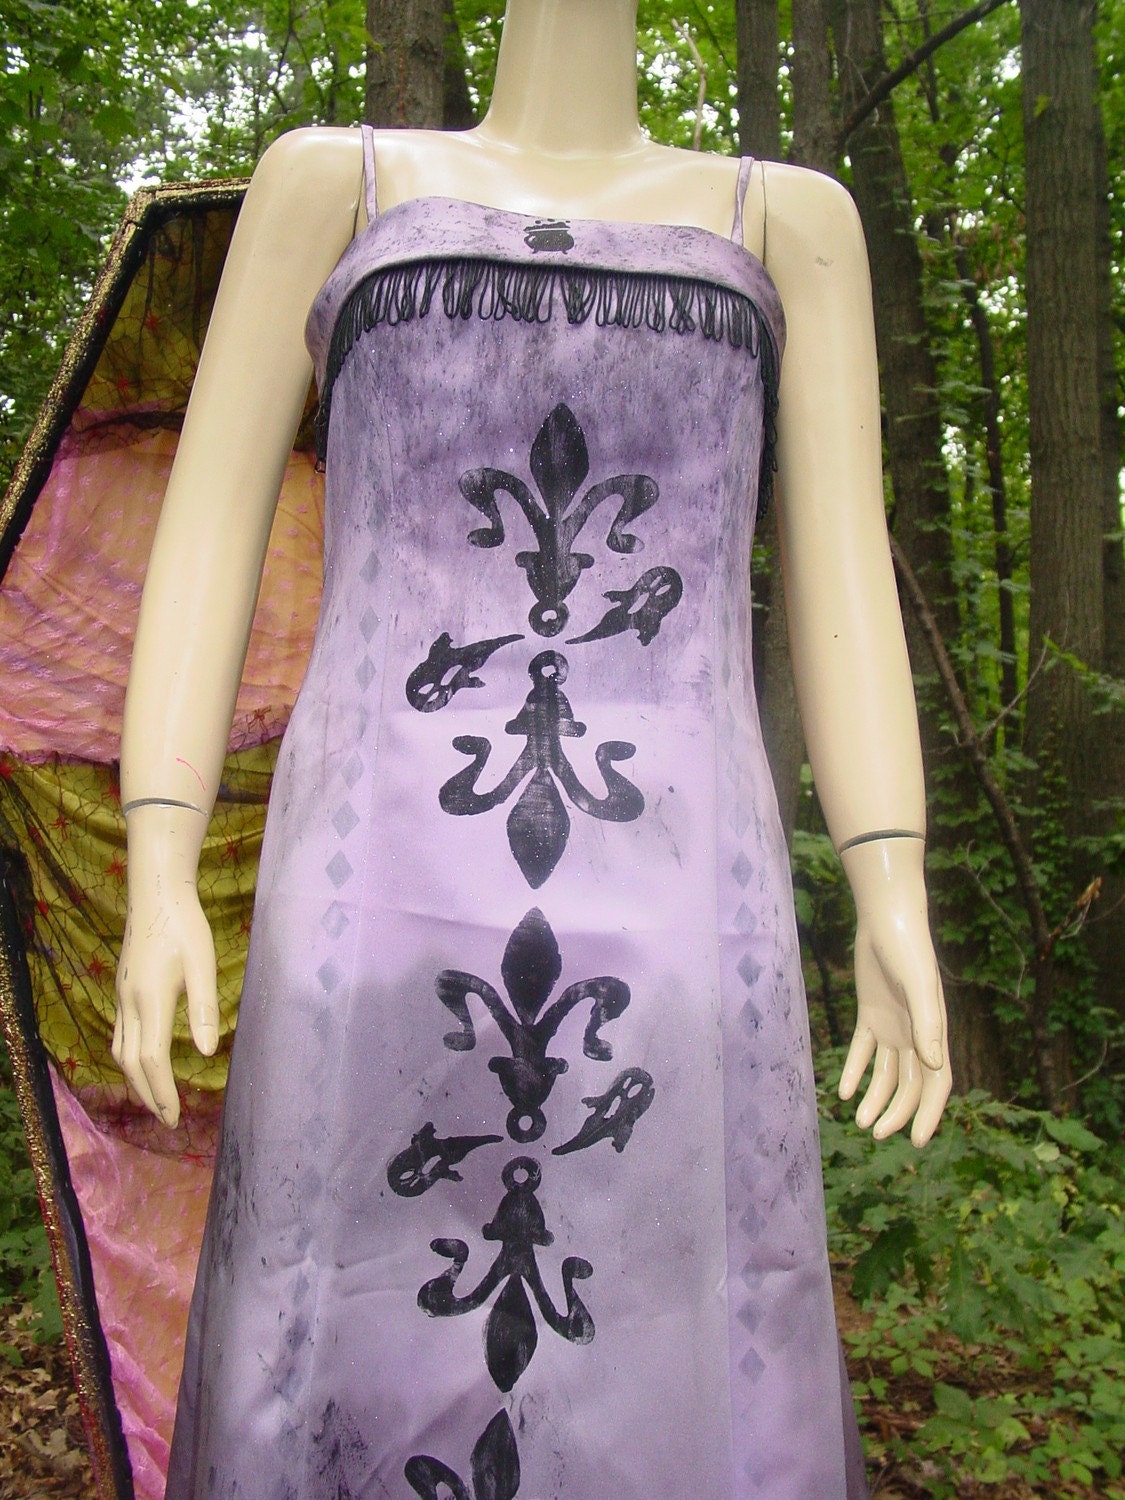 handmade VAMPIRE GOWN with ghosts,spiders and caldron HALLOWEEN COSTUME or zombie prom